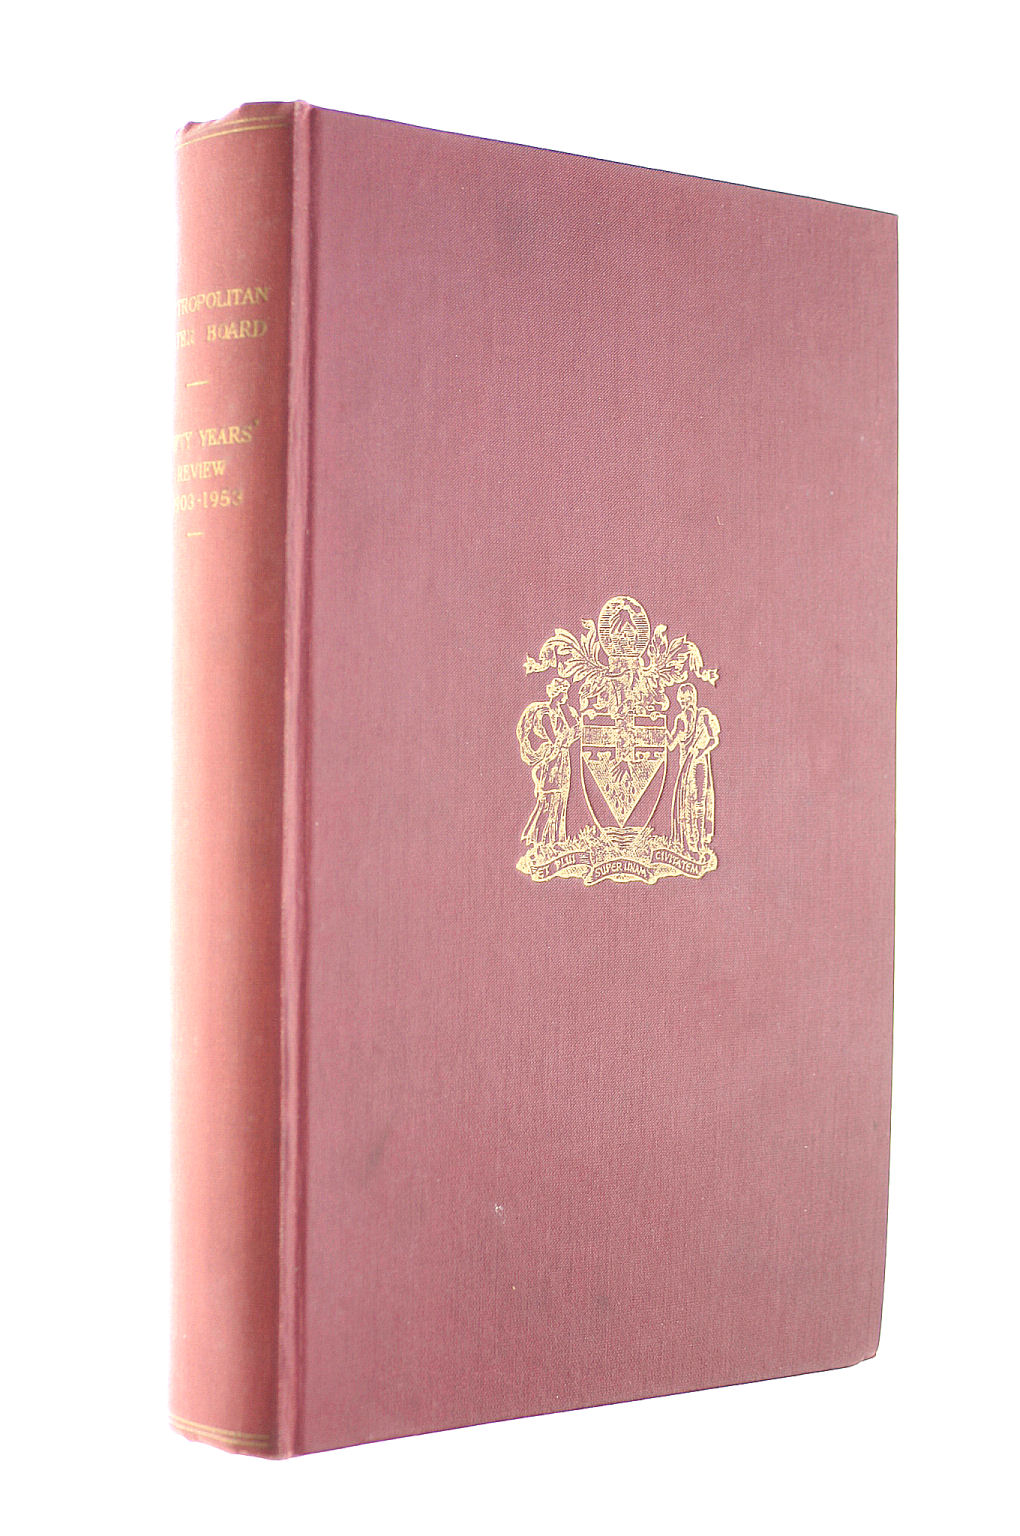 CHEVALIER, W. S. (ISSUED BY) - London's Water Supply 1903-1953 A Review of the Work of the Metropolitan Water Board